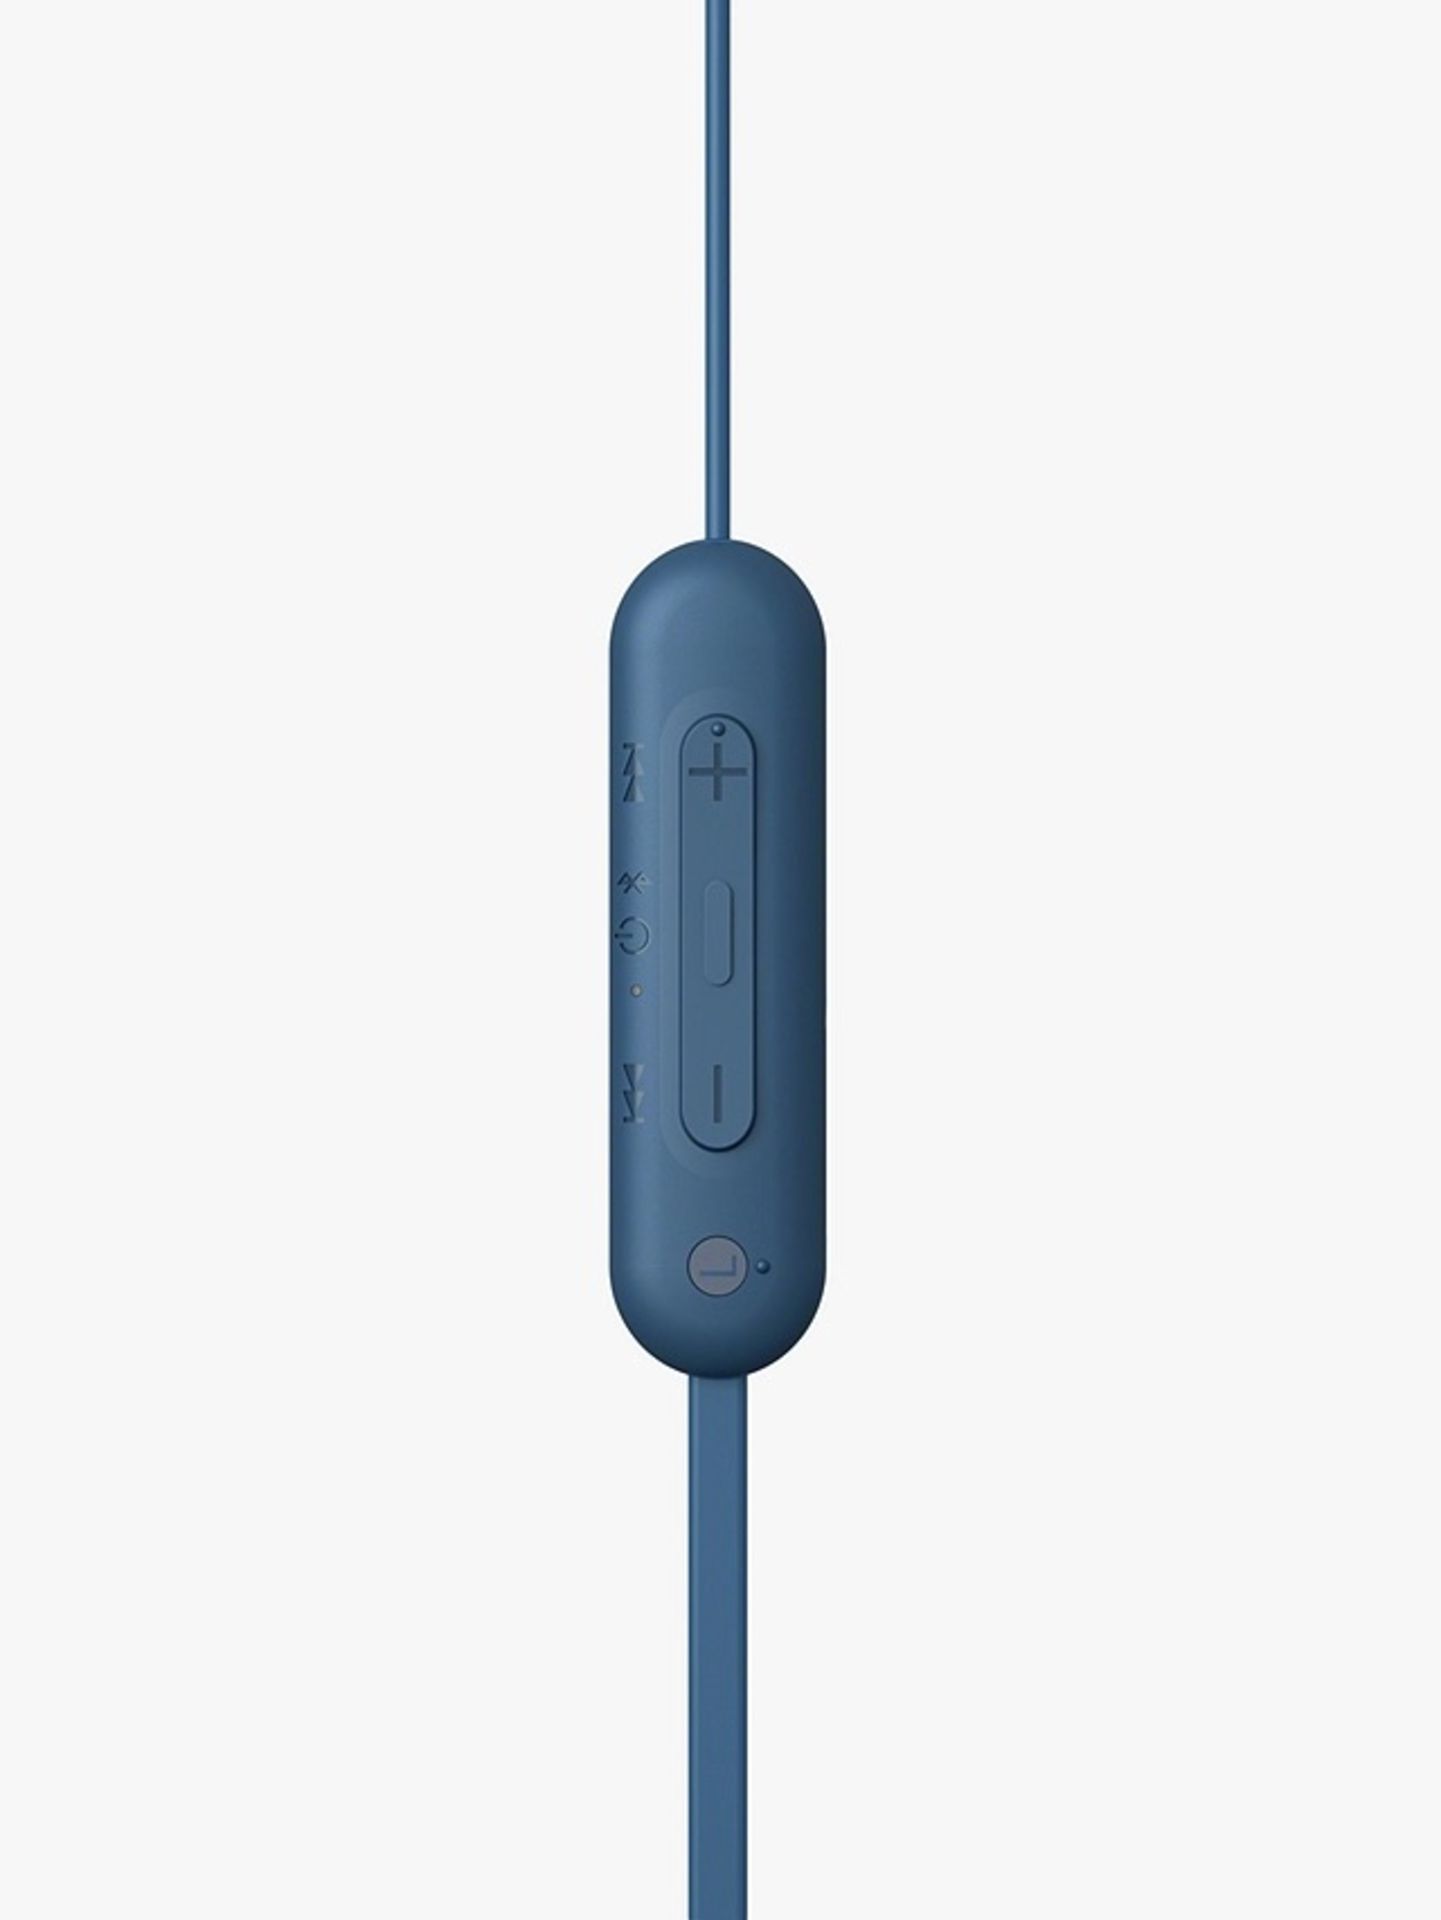 SONY WI-C100 BLUETOOTH WIRELESS IN-EAR HEADPHONES WITH MIC/REMOTE IN BLUE - RRP £35 - Image 3 of 6